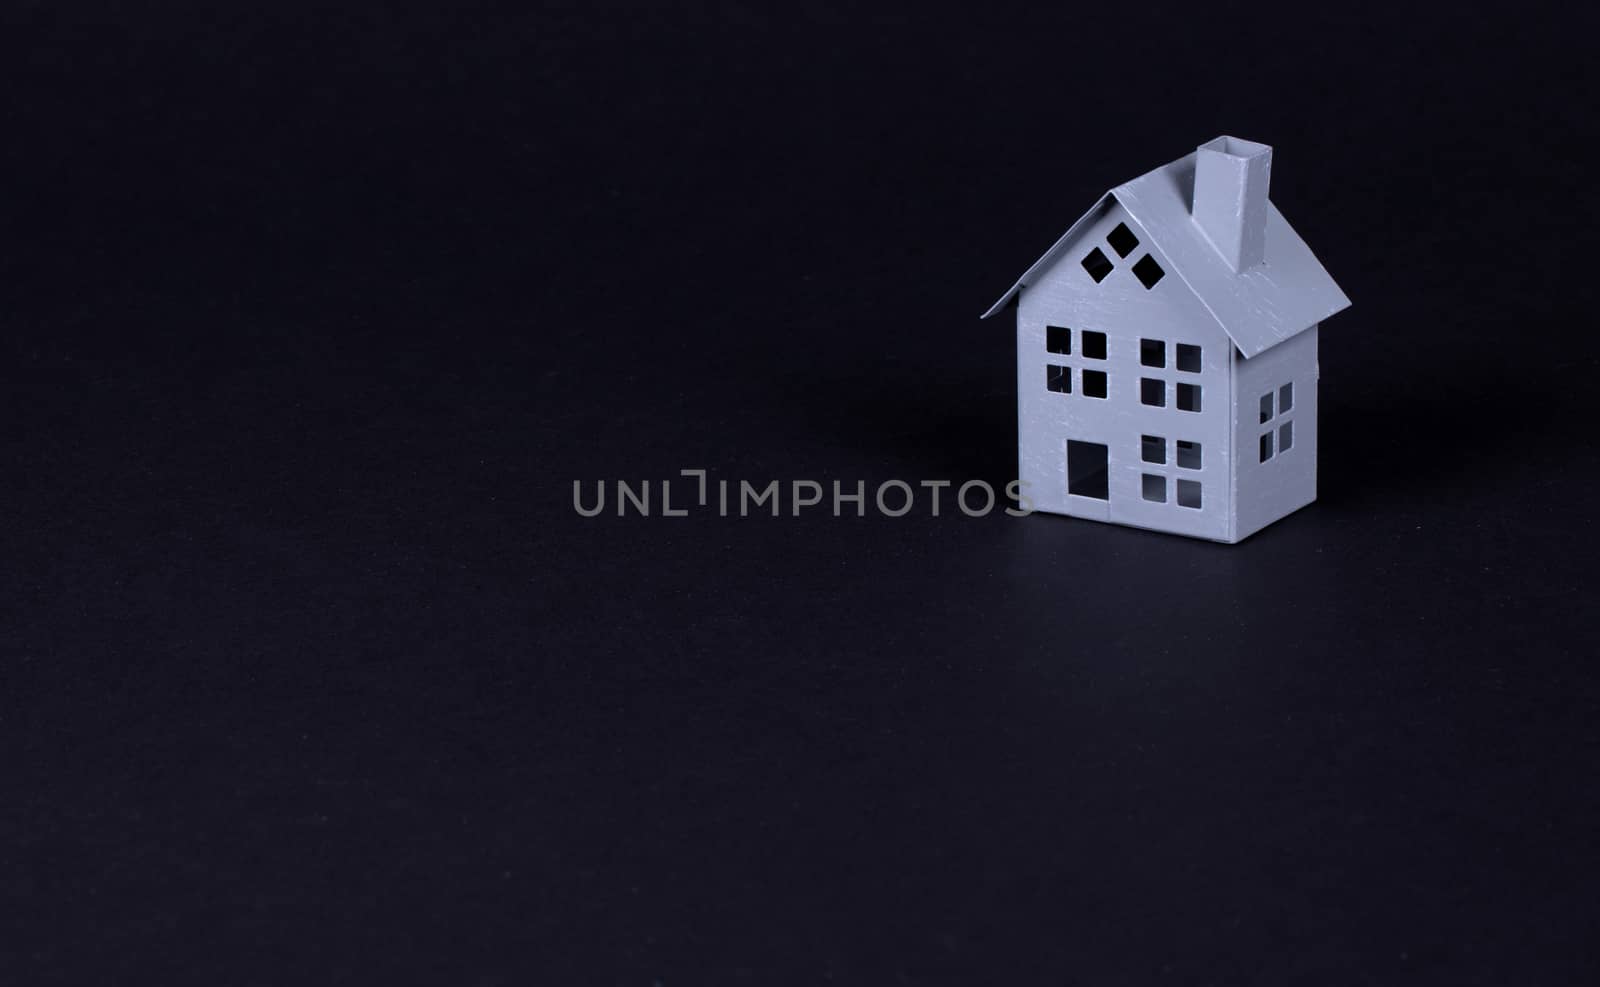 Estate concept, metal house on isolated on black background - Idea for real estate concept, personal property and family house